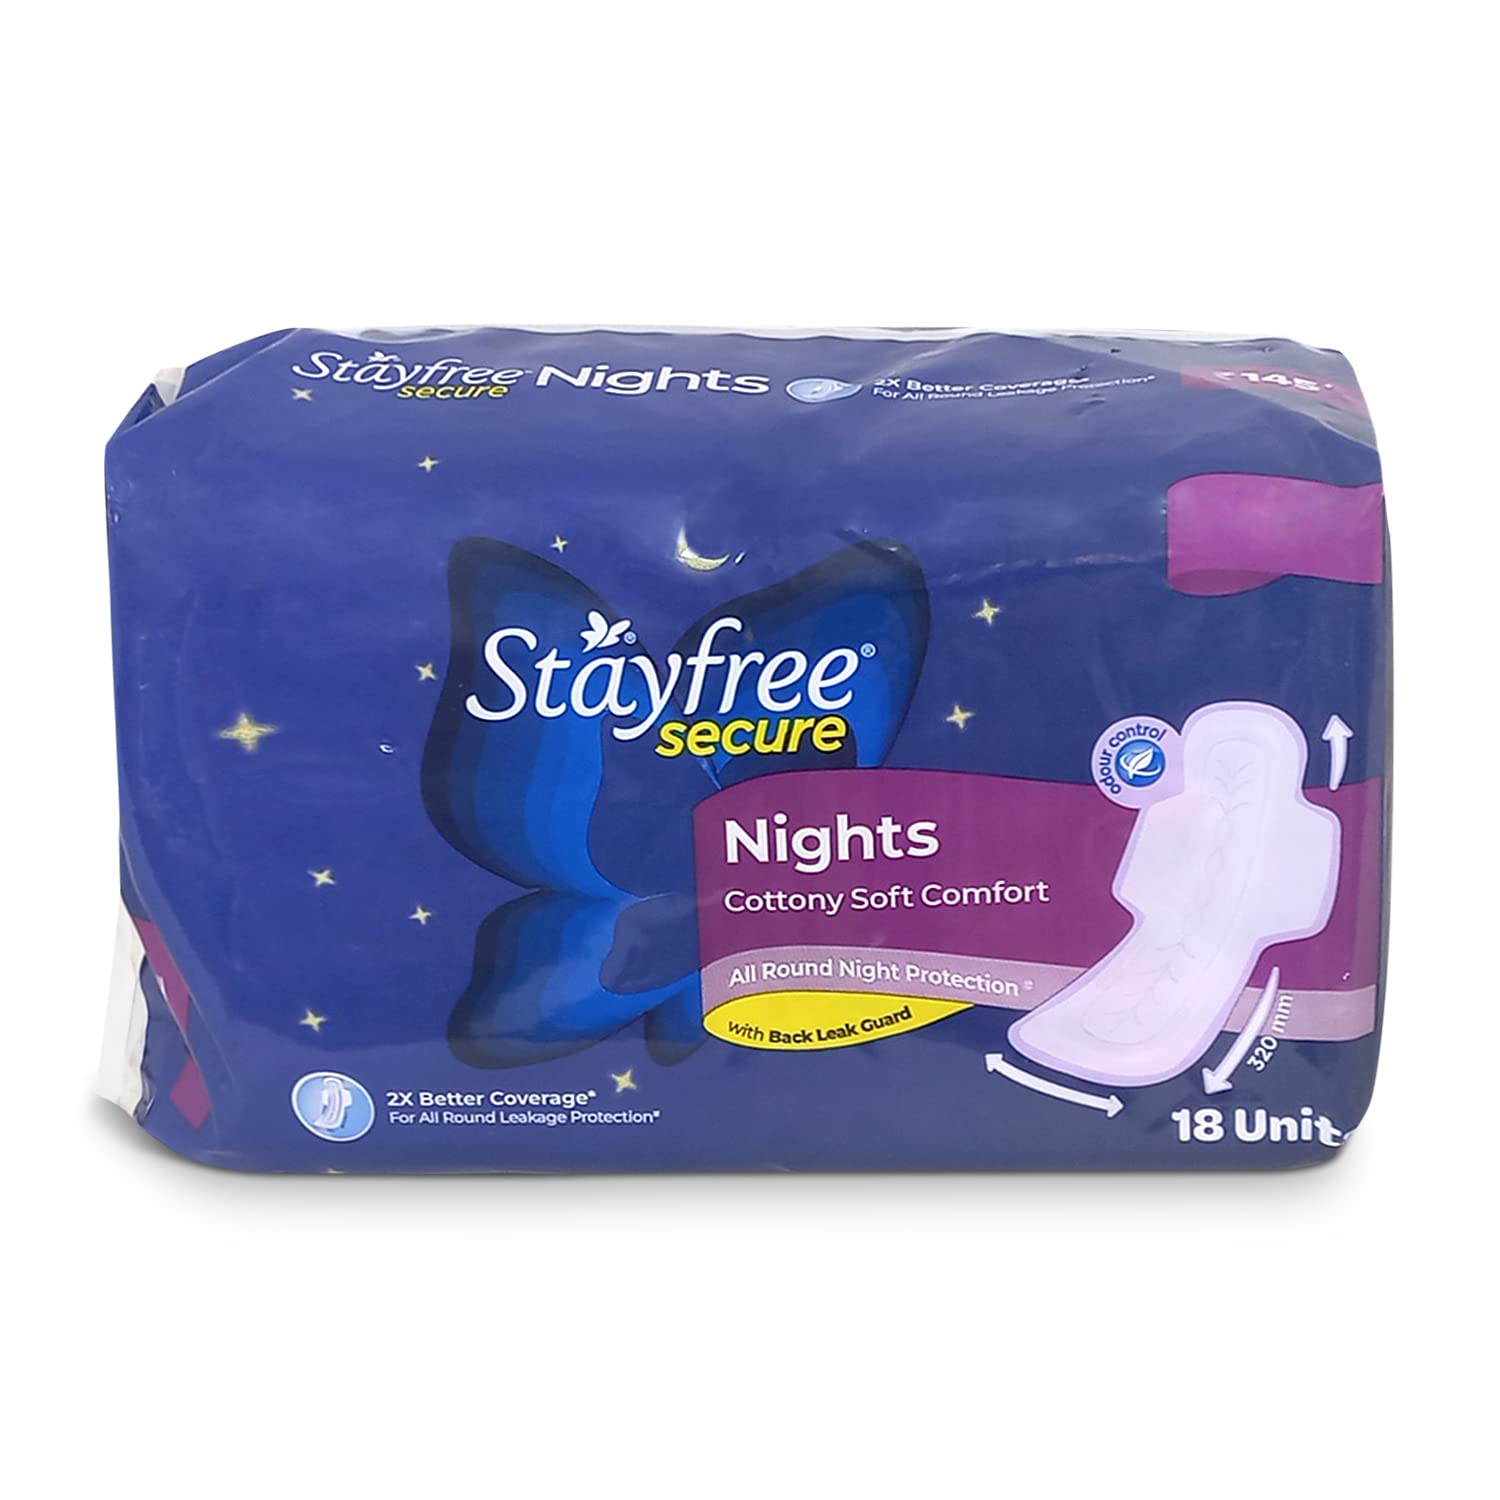 Stayfree Secure Night Cottony Soft Sanitary Pads for Women (Pack of 18)